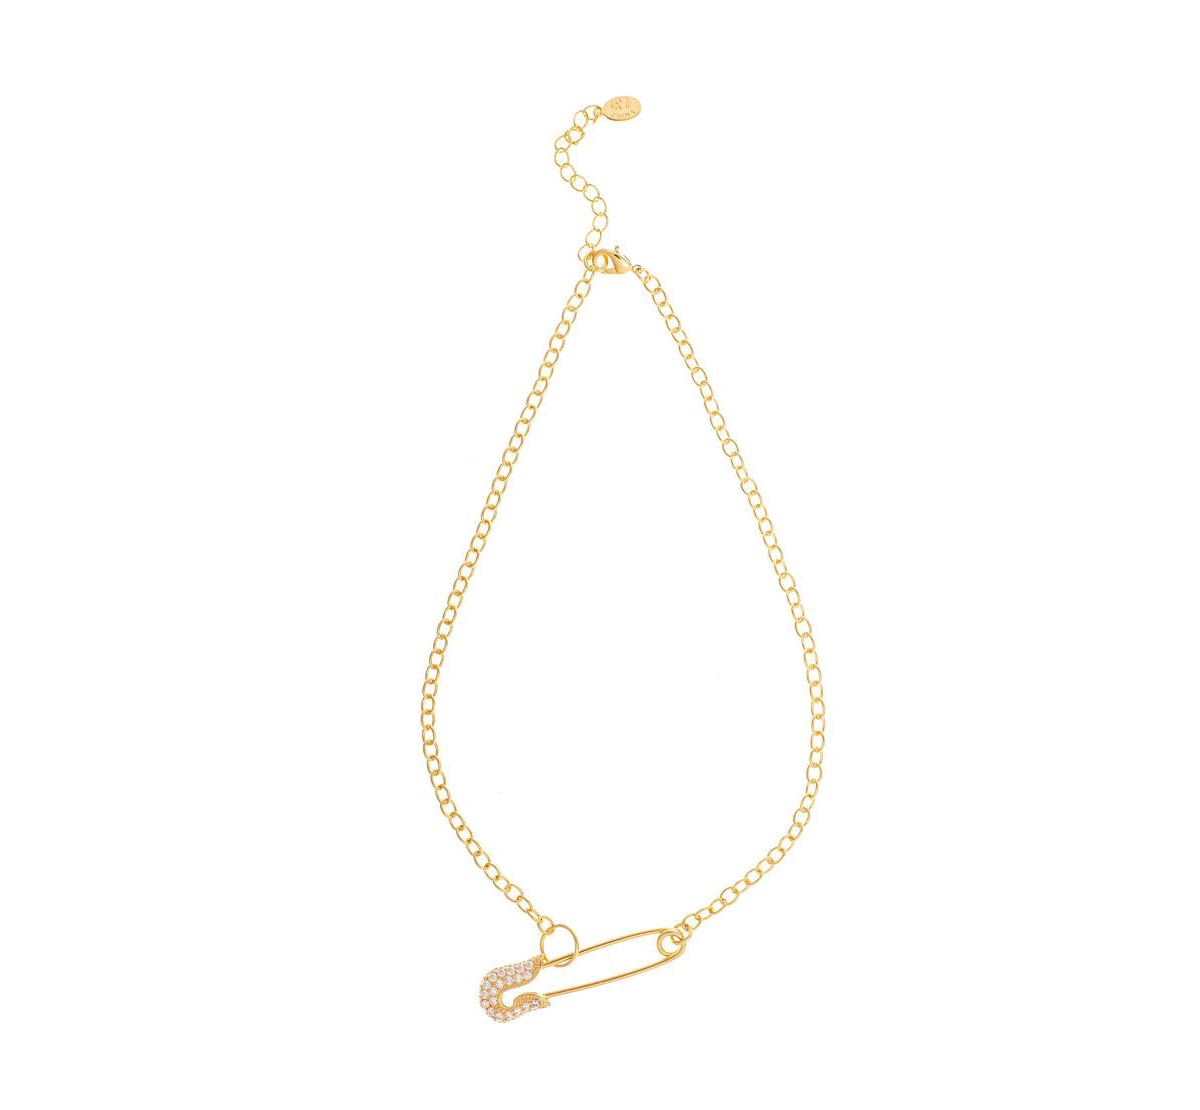 Cubic Zirconia Encrusted Safety Pin Chain Necklace - Gold with clear cubic zirconia